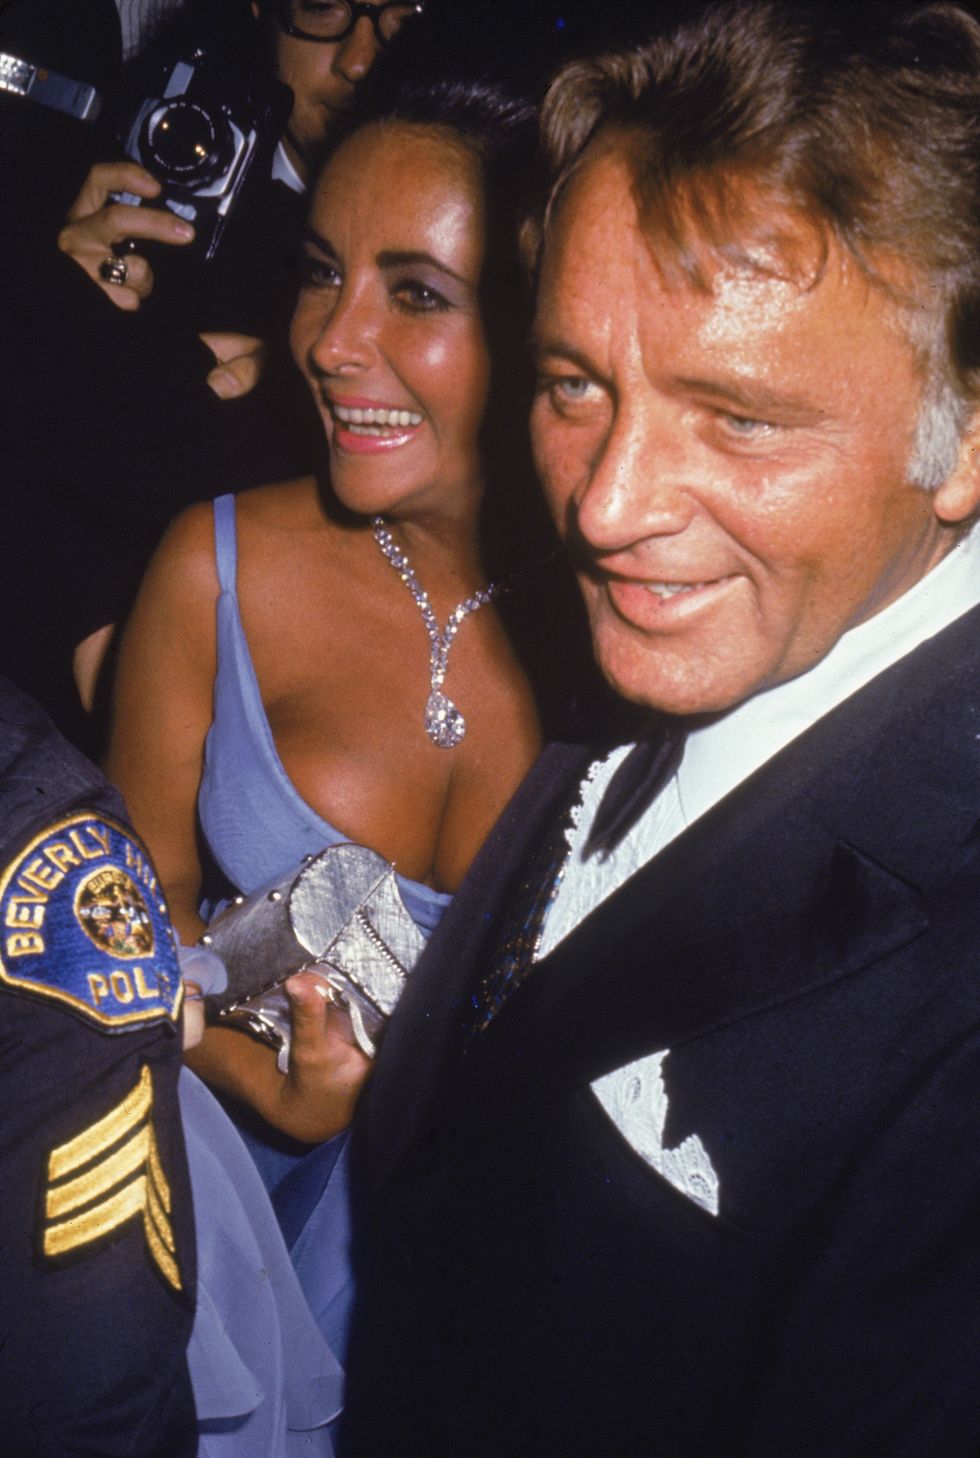 married actors elizabeth taylor and richard burton 1925   1984 smile as they attend the academy awards ceremonies, los angeles, california, april 7, 1970 photo by fotos internationalgetty images